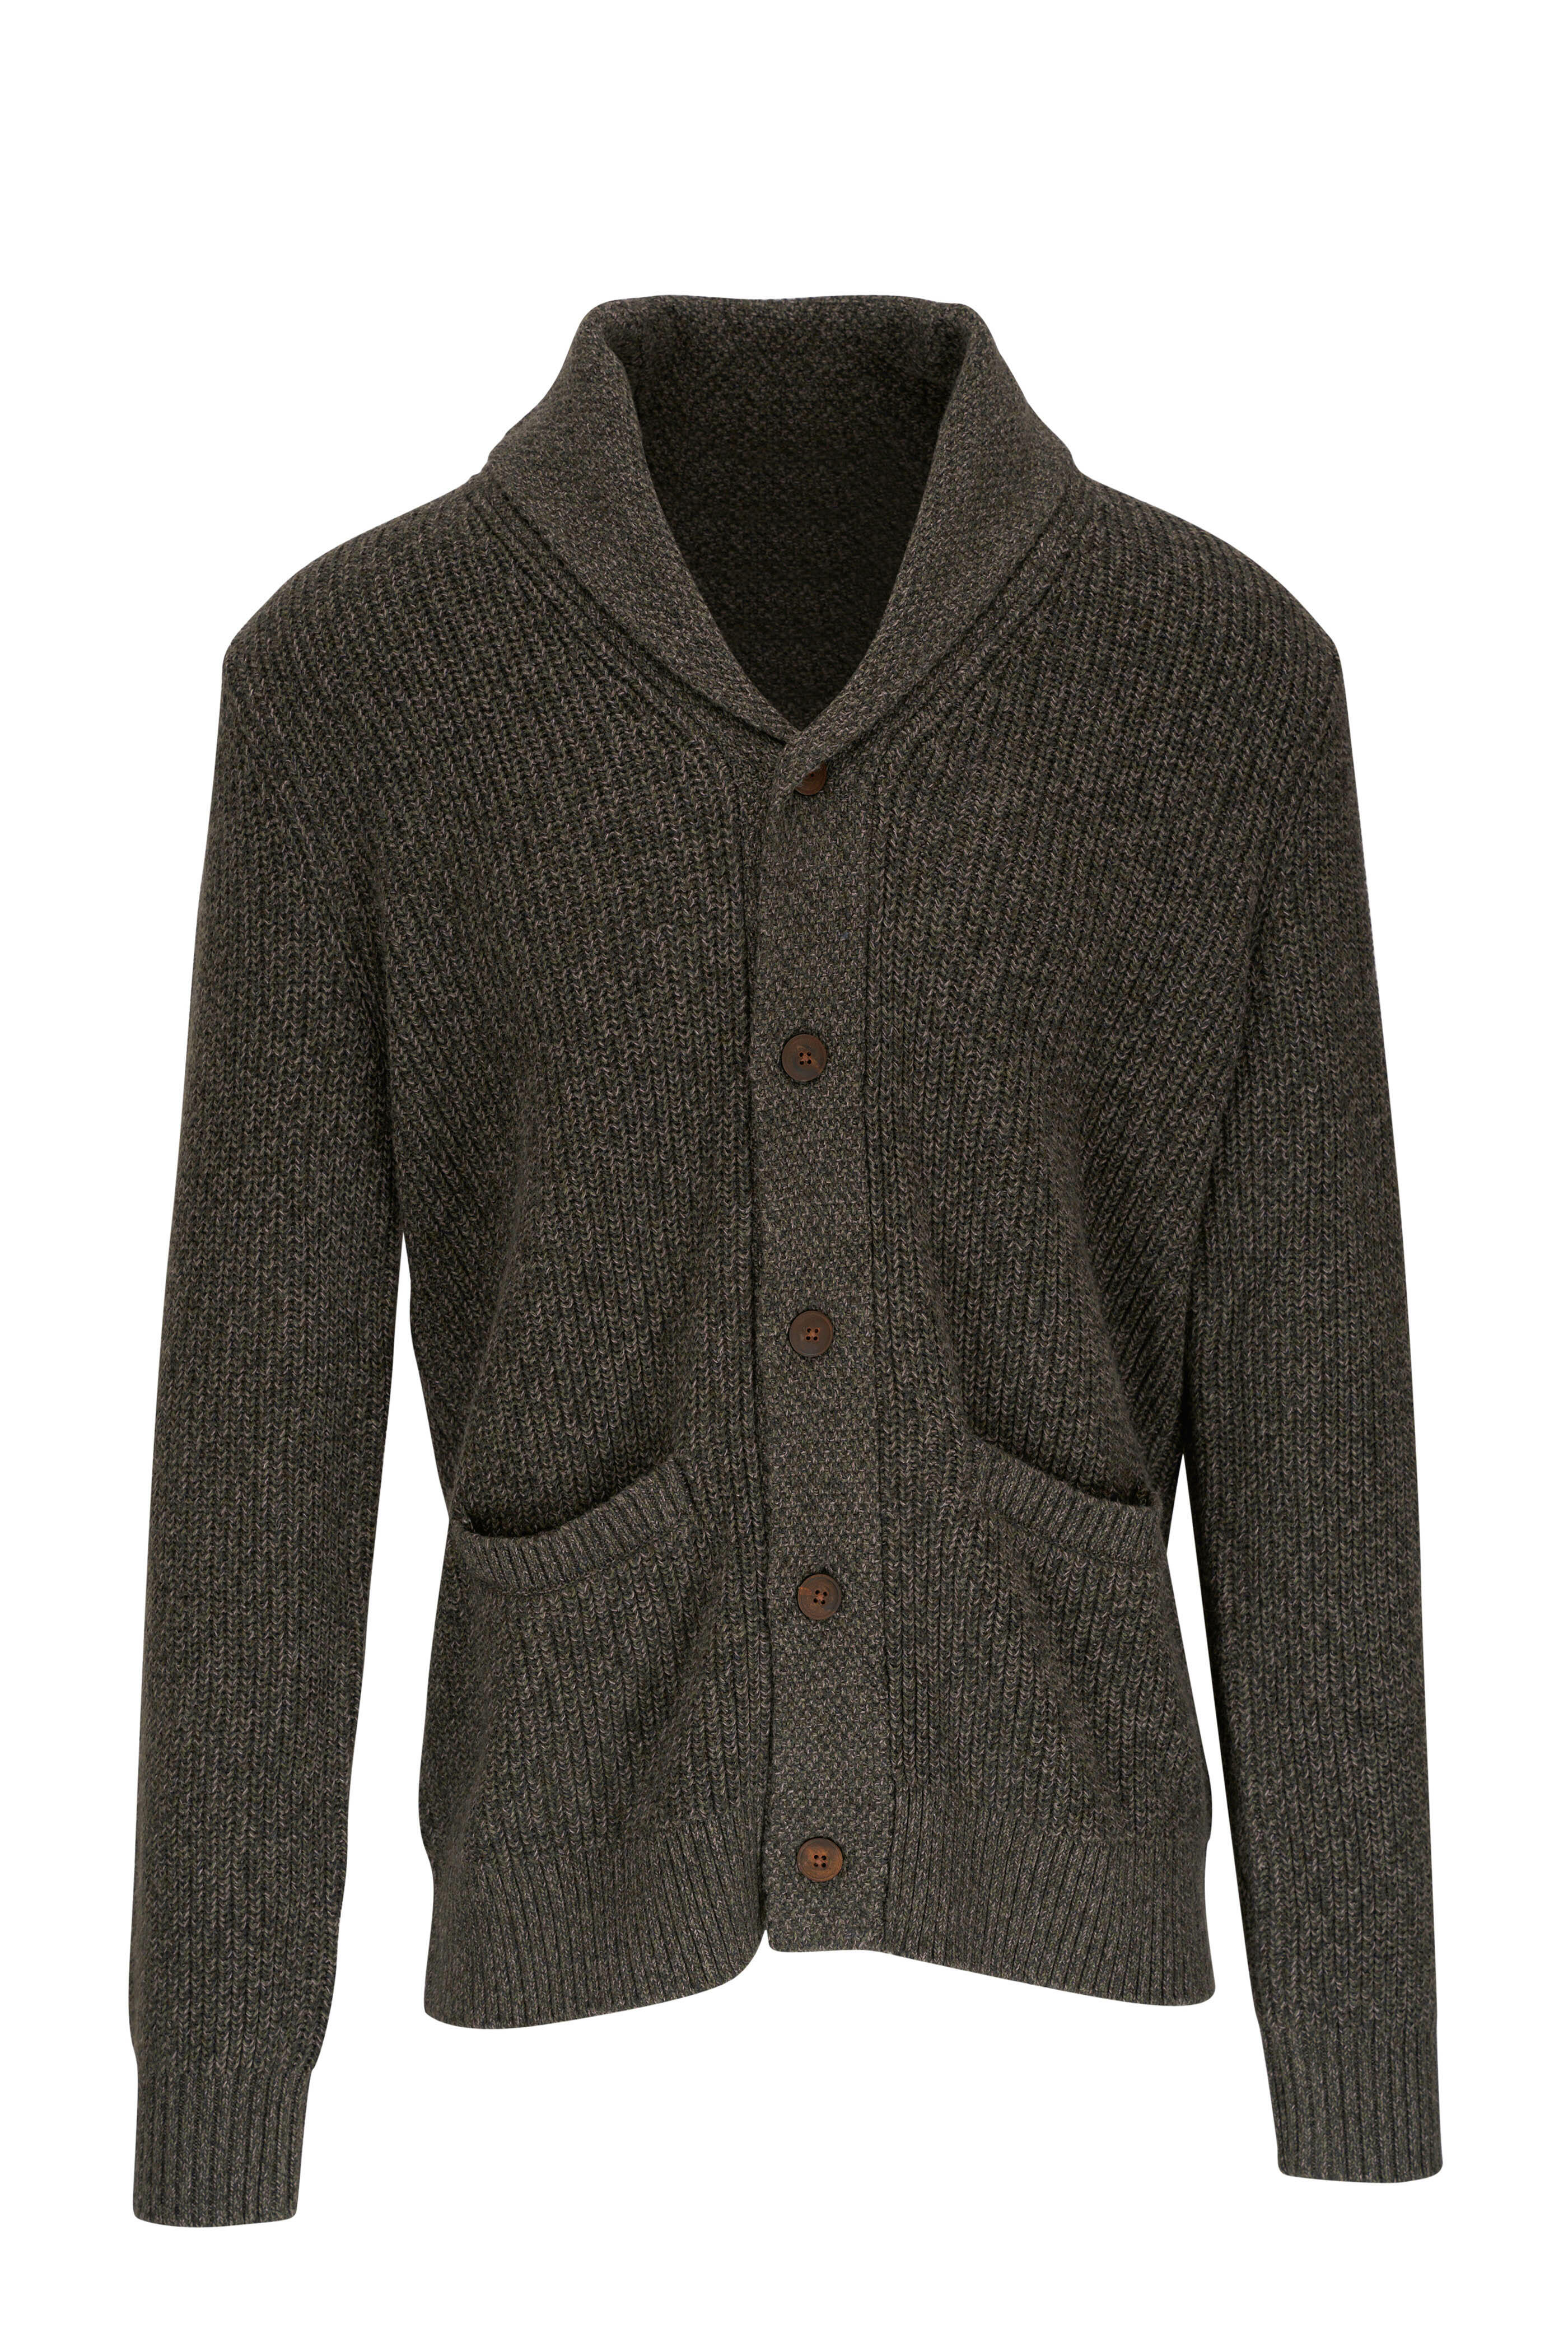 Faherty Brand - Marled Olive Green Cotton & Cashmere Cardigan